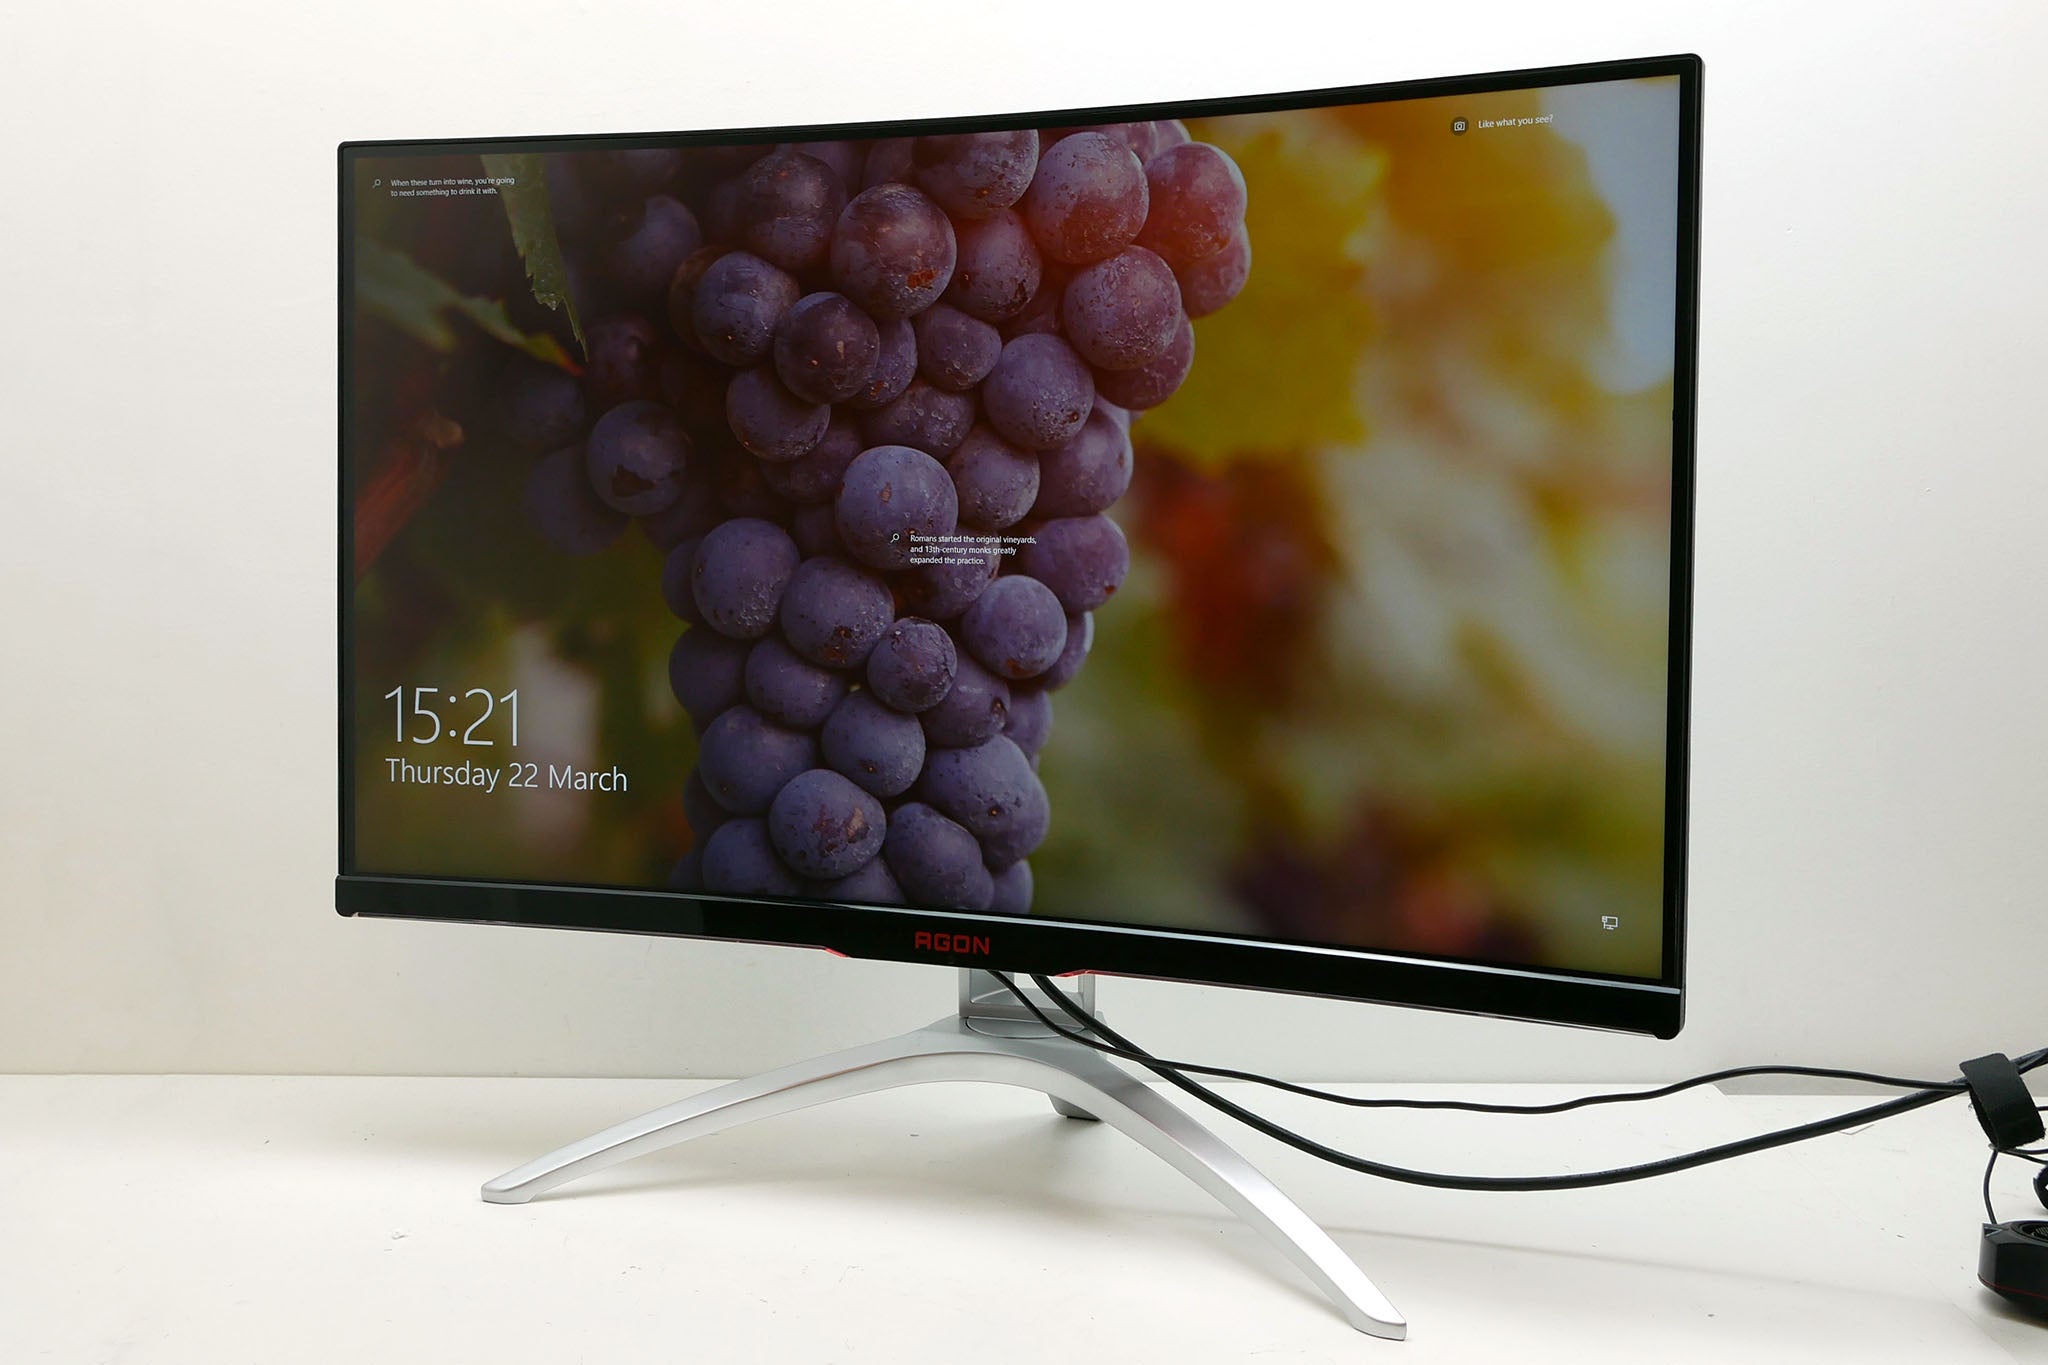 AOC AG322QCX gaming monitor displaying a colorful image with grapes.